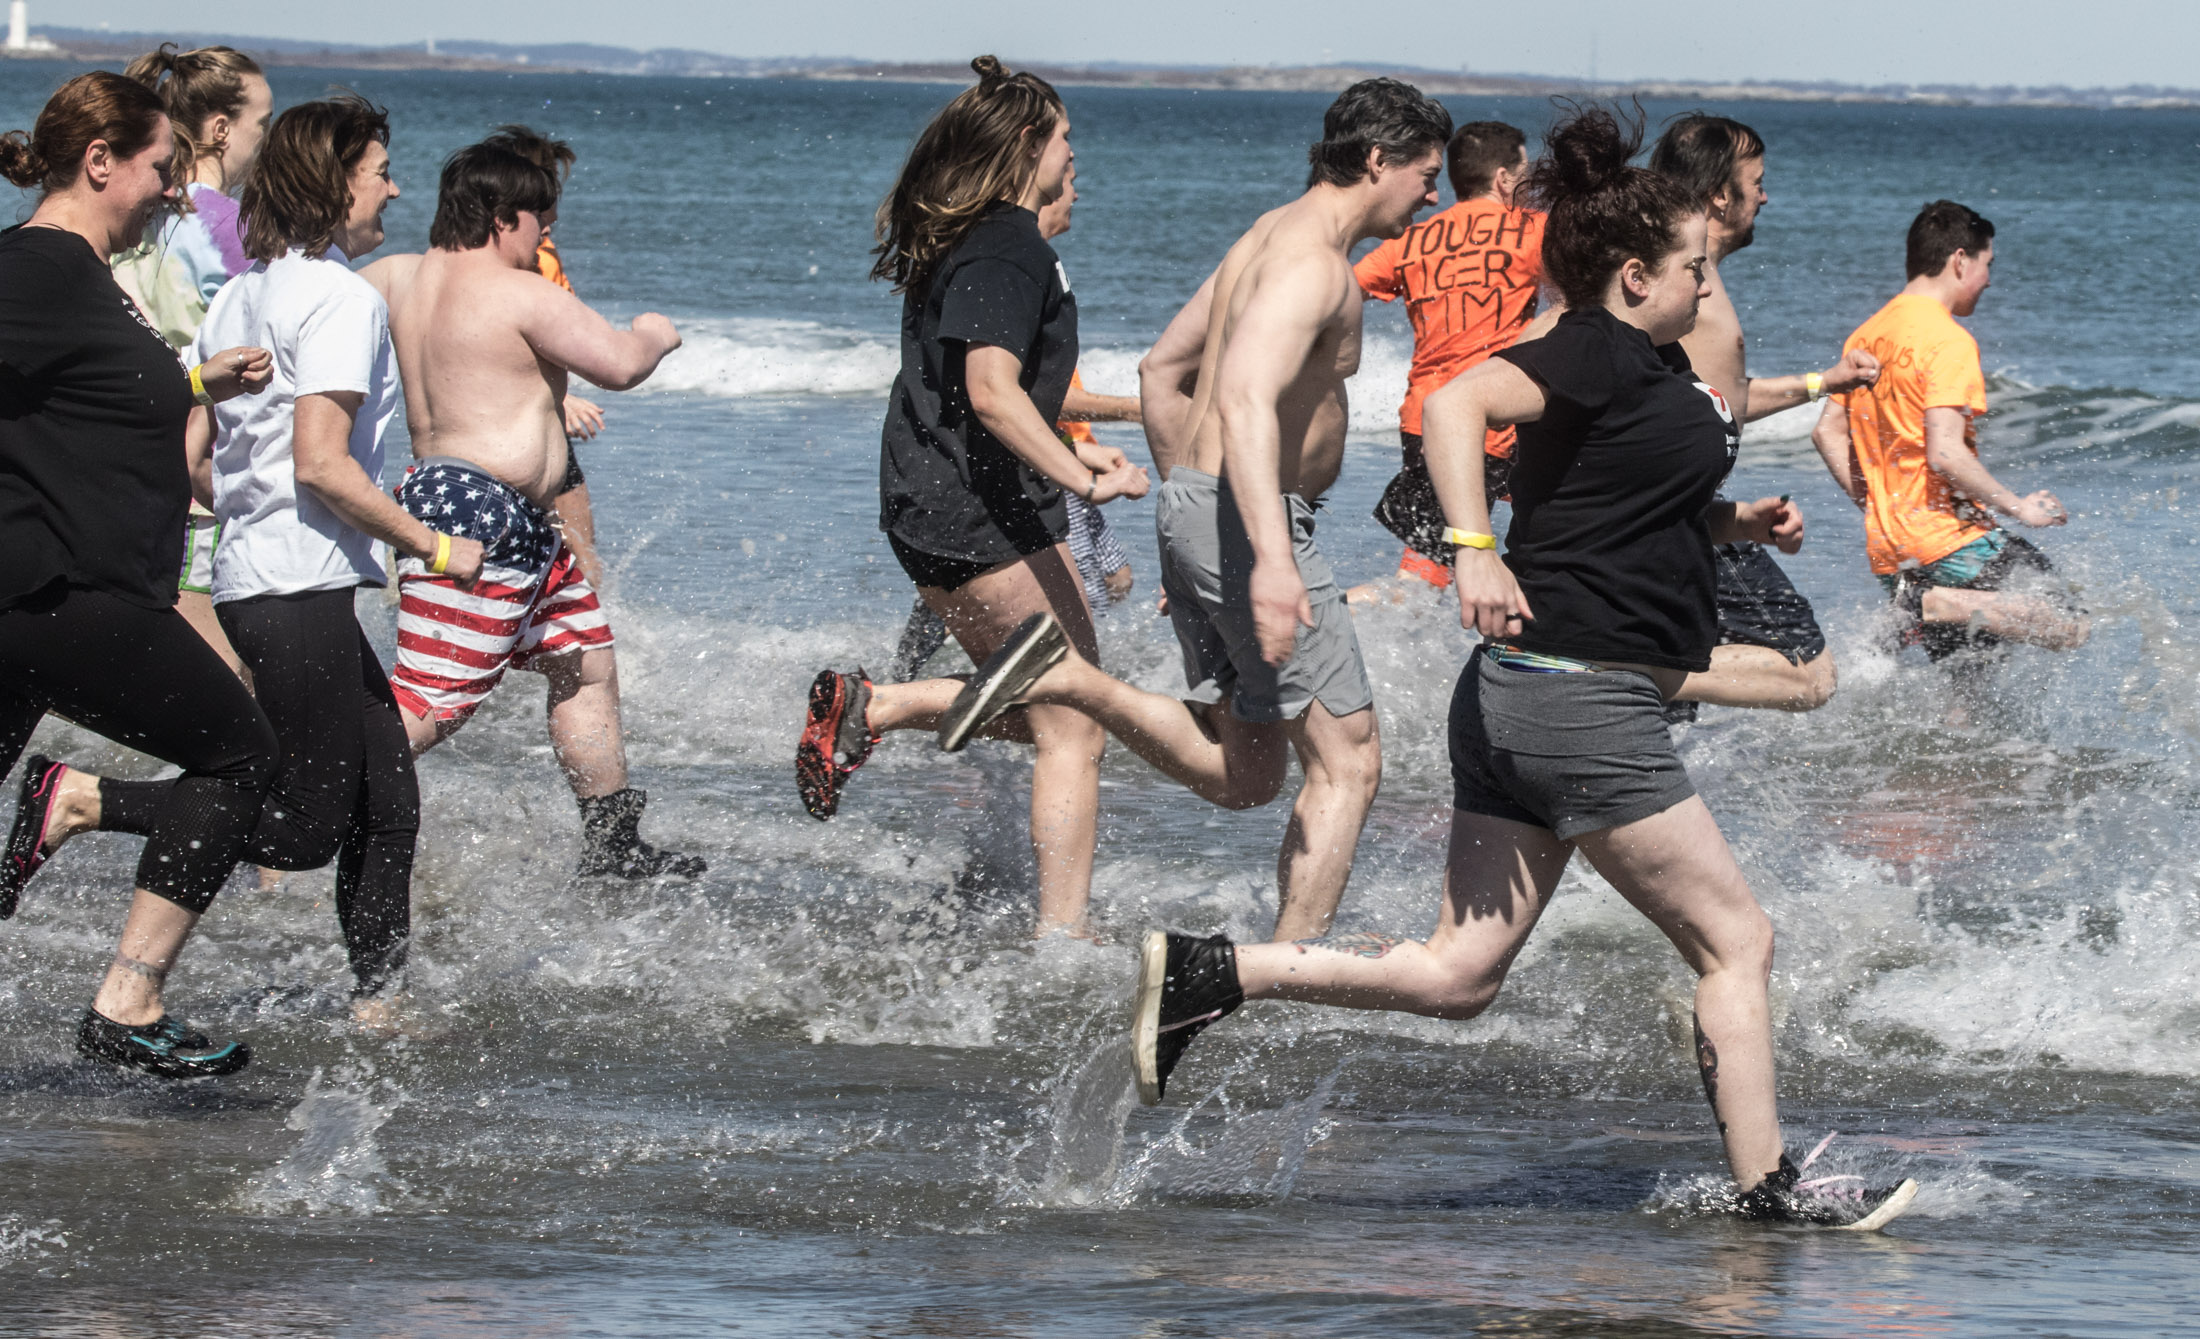 Hundreds take the “plunge” at Nantasket Beach for Special Olympics